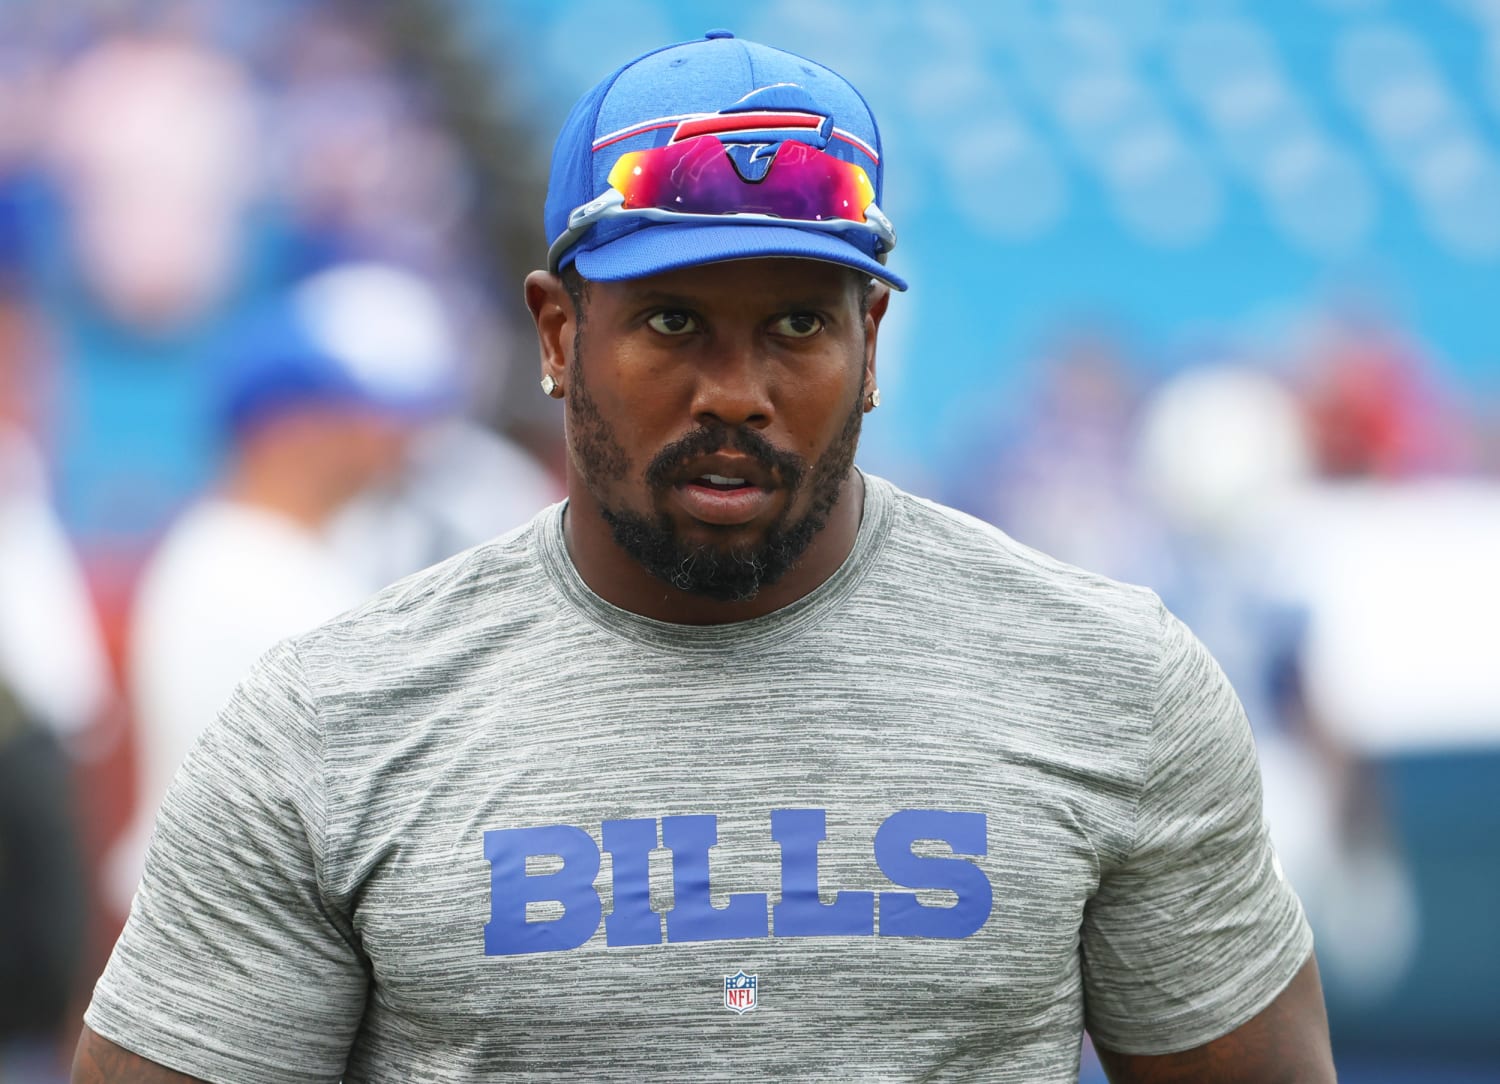 Buffalo Bills player Von Miller is wanted by police after he assaulted a pregnant woman